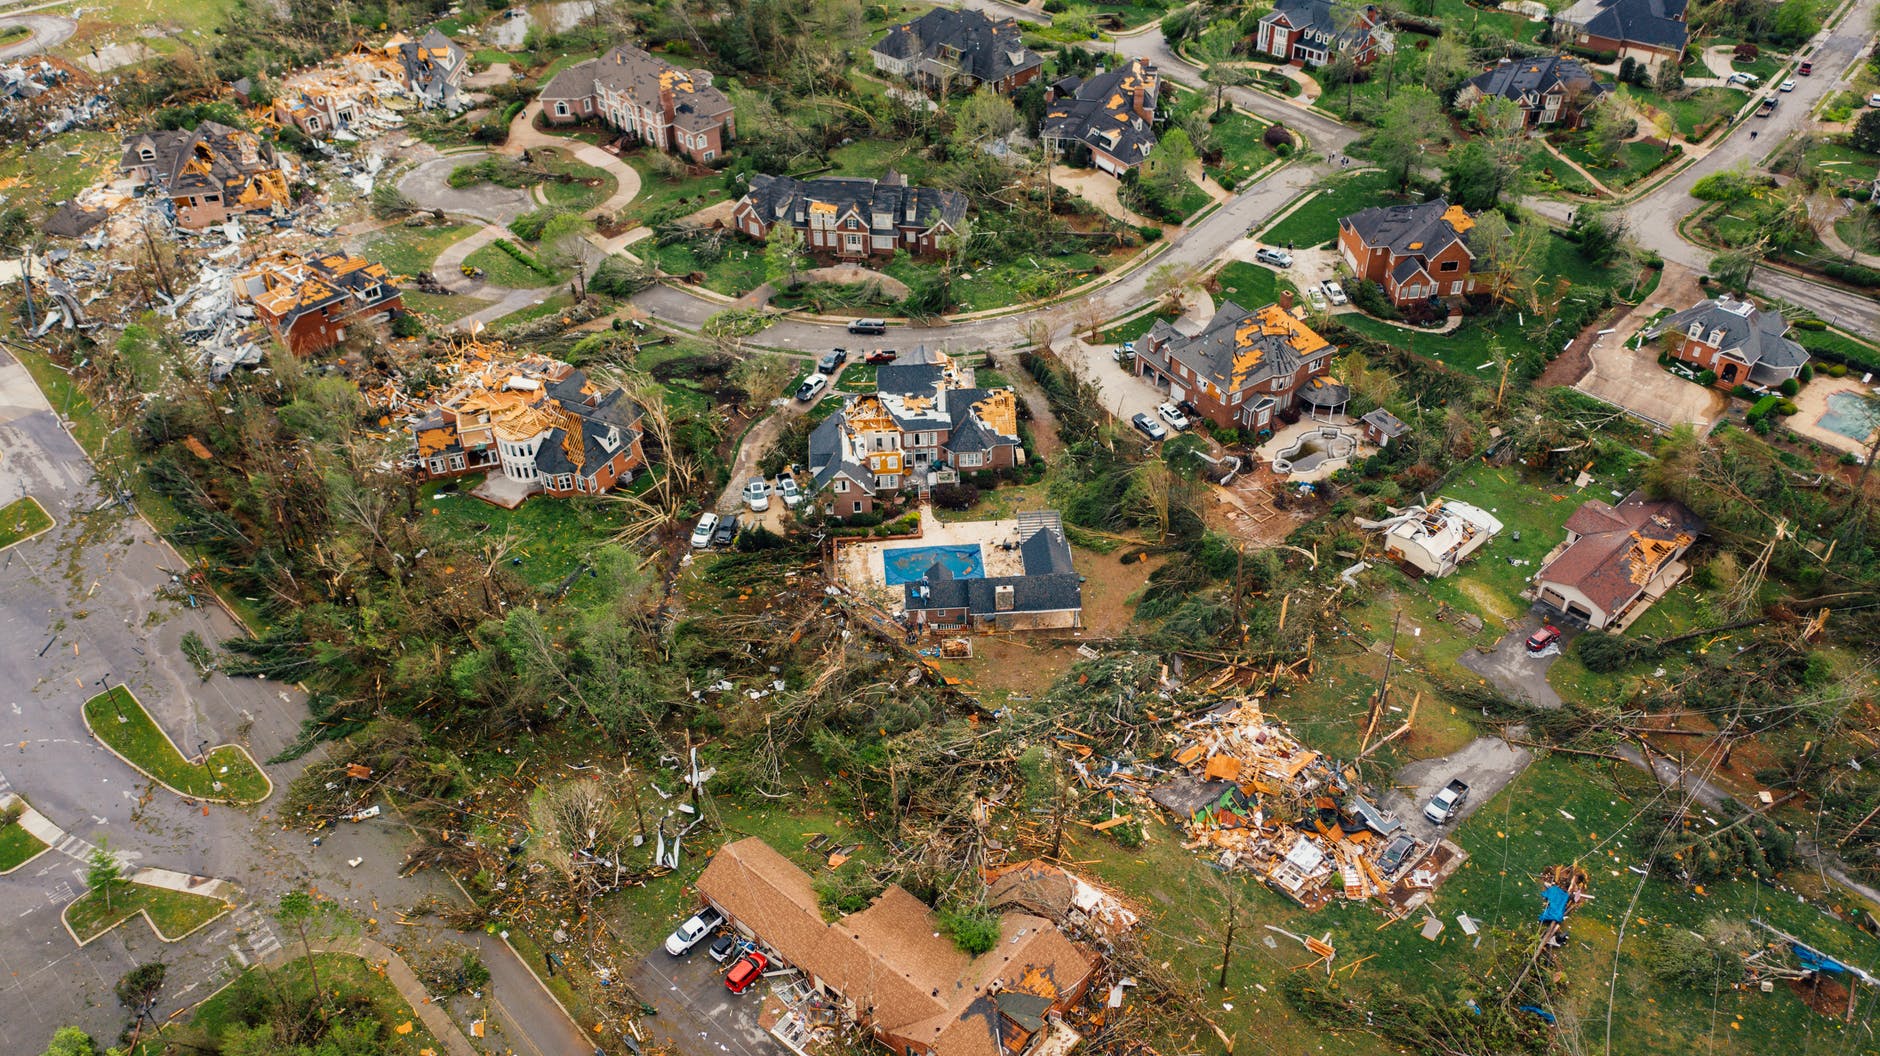 Tenant and Landlord Responsibilities in a Natural Disaster